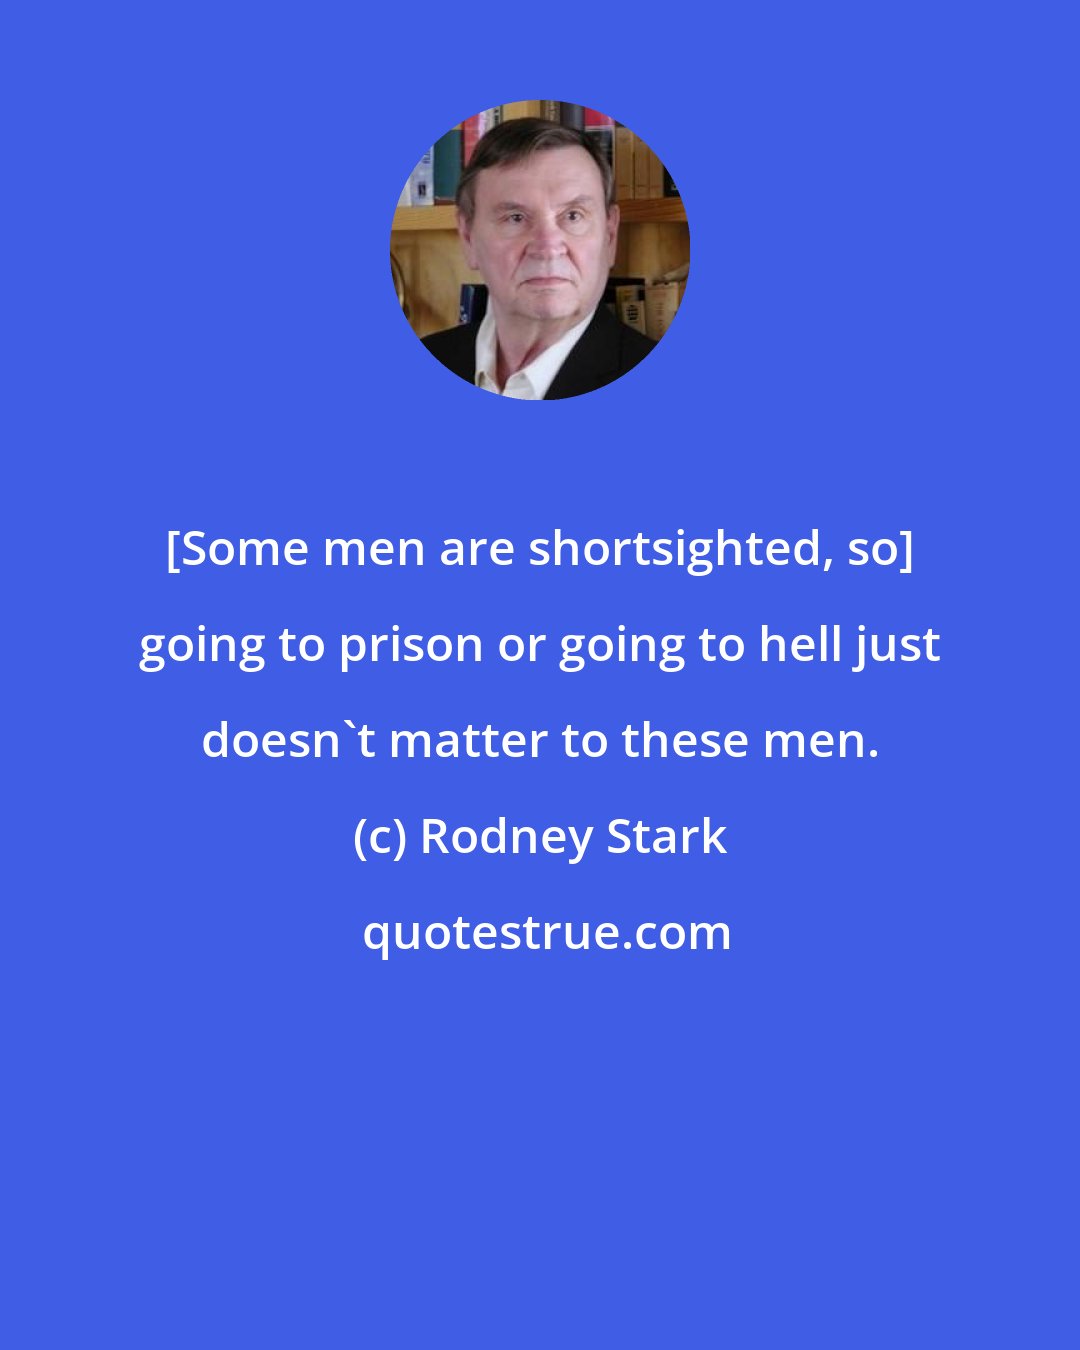 Rodney Stark: [Some men are shortsighted, so] going to prison or going to hell just doesn't matter to these men.